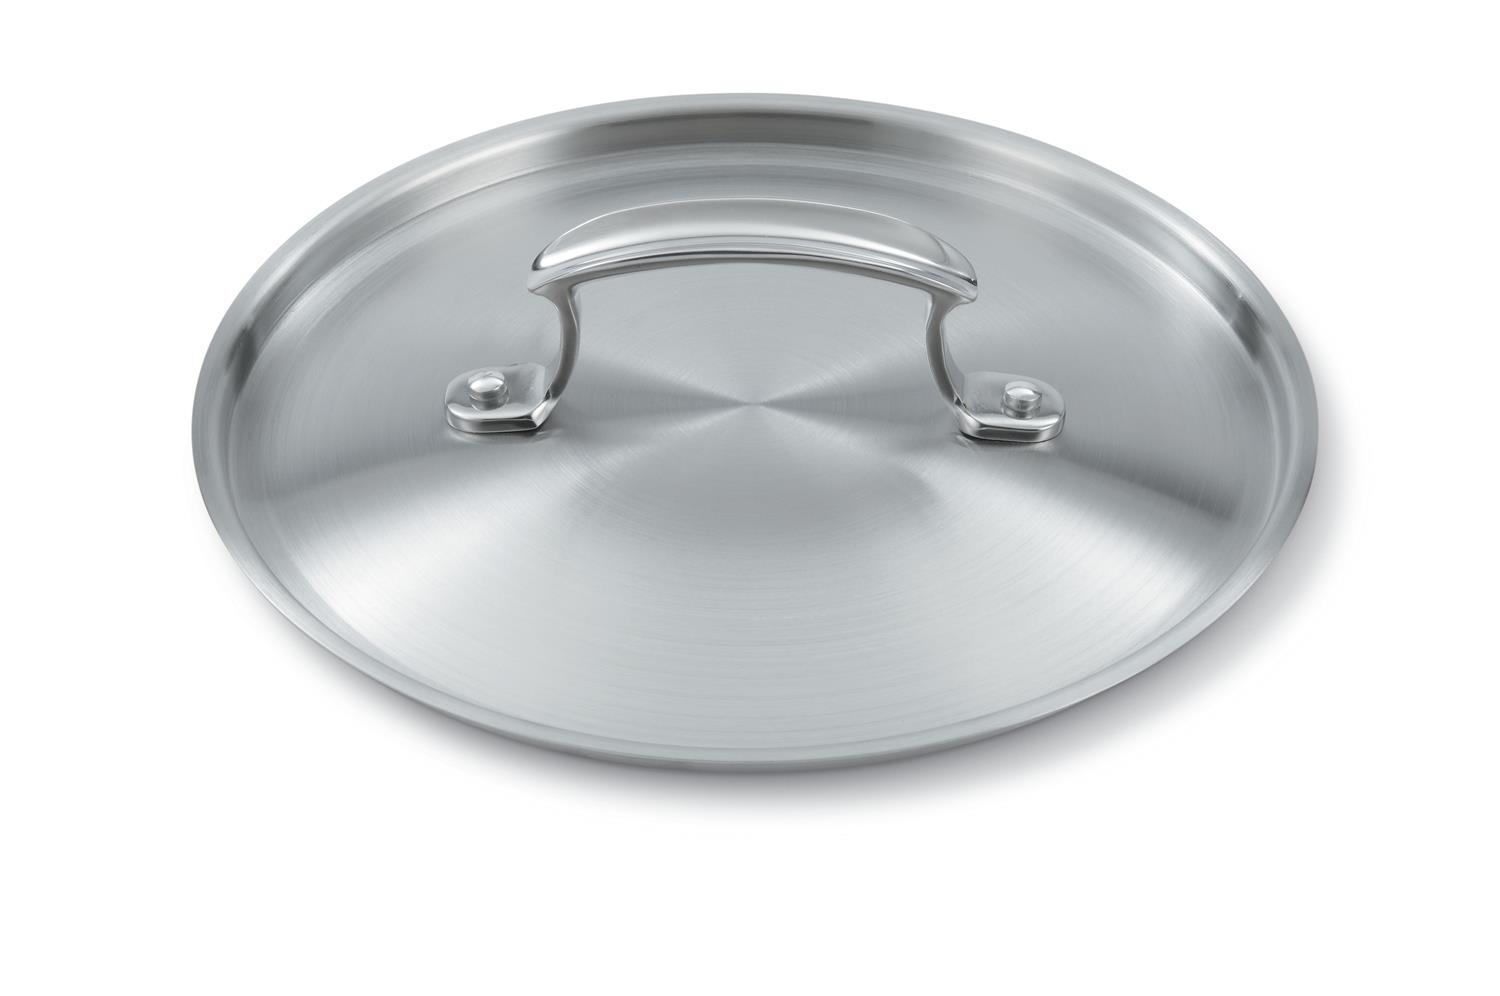 Vollrath 49419 Miramar Display Cookware, Low Dome Cover